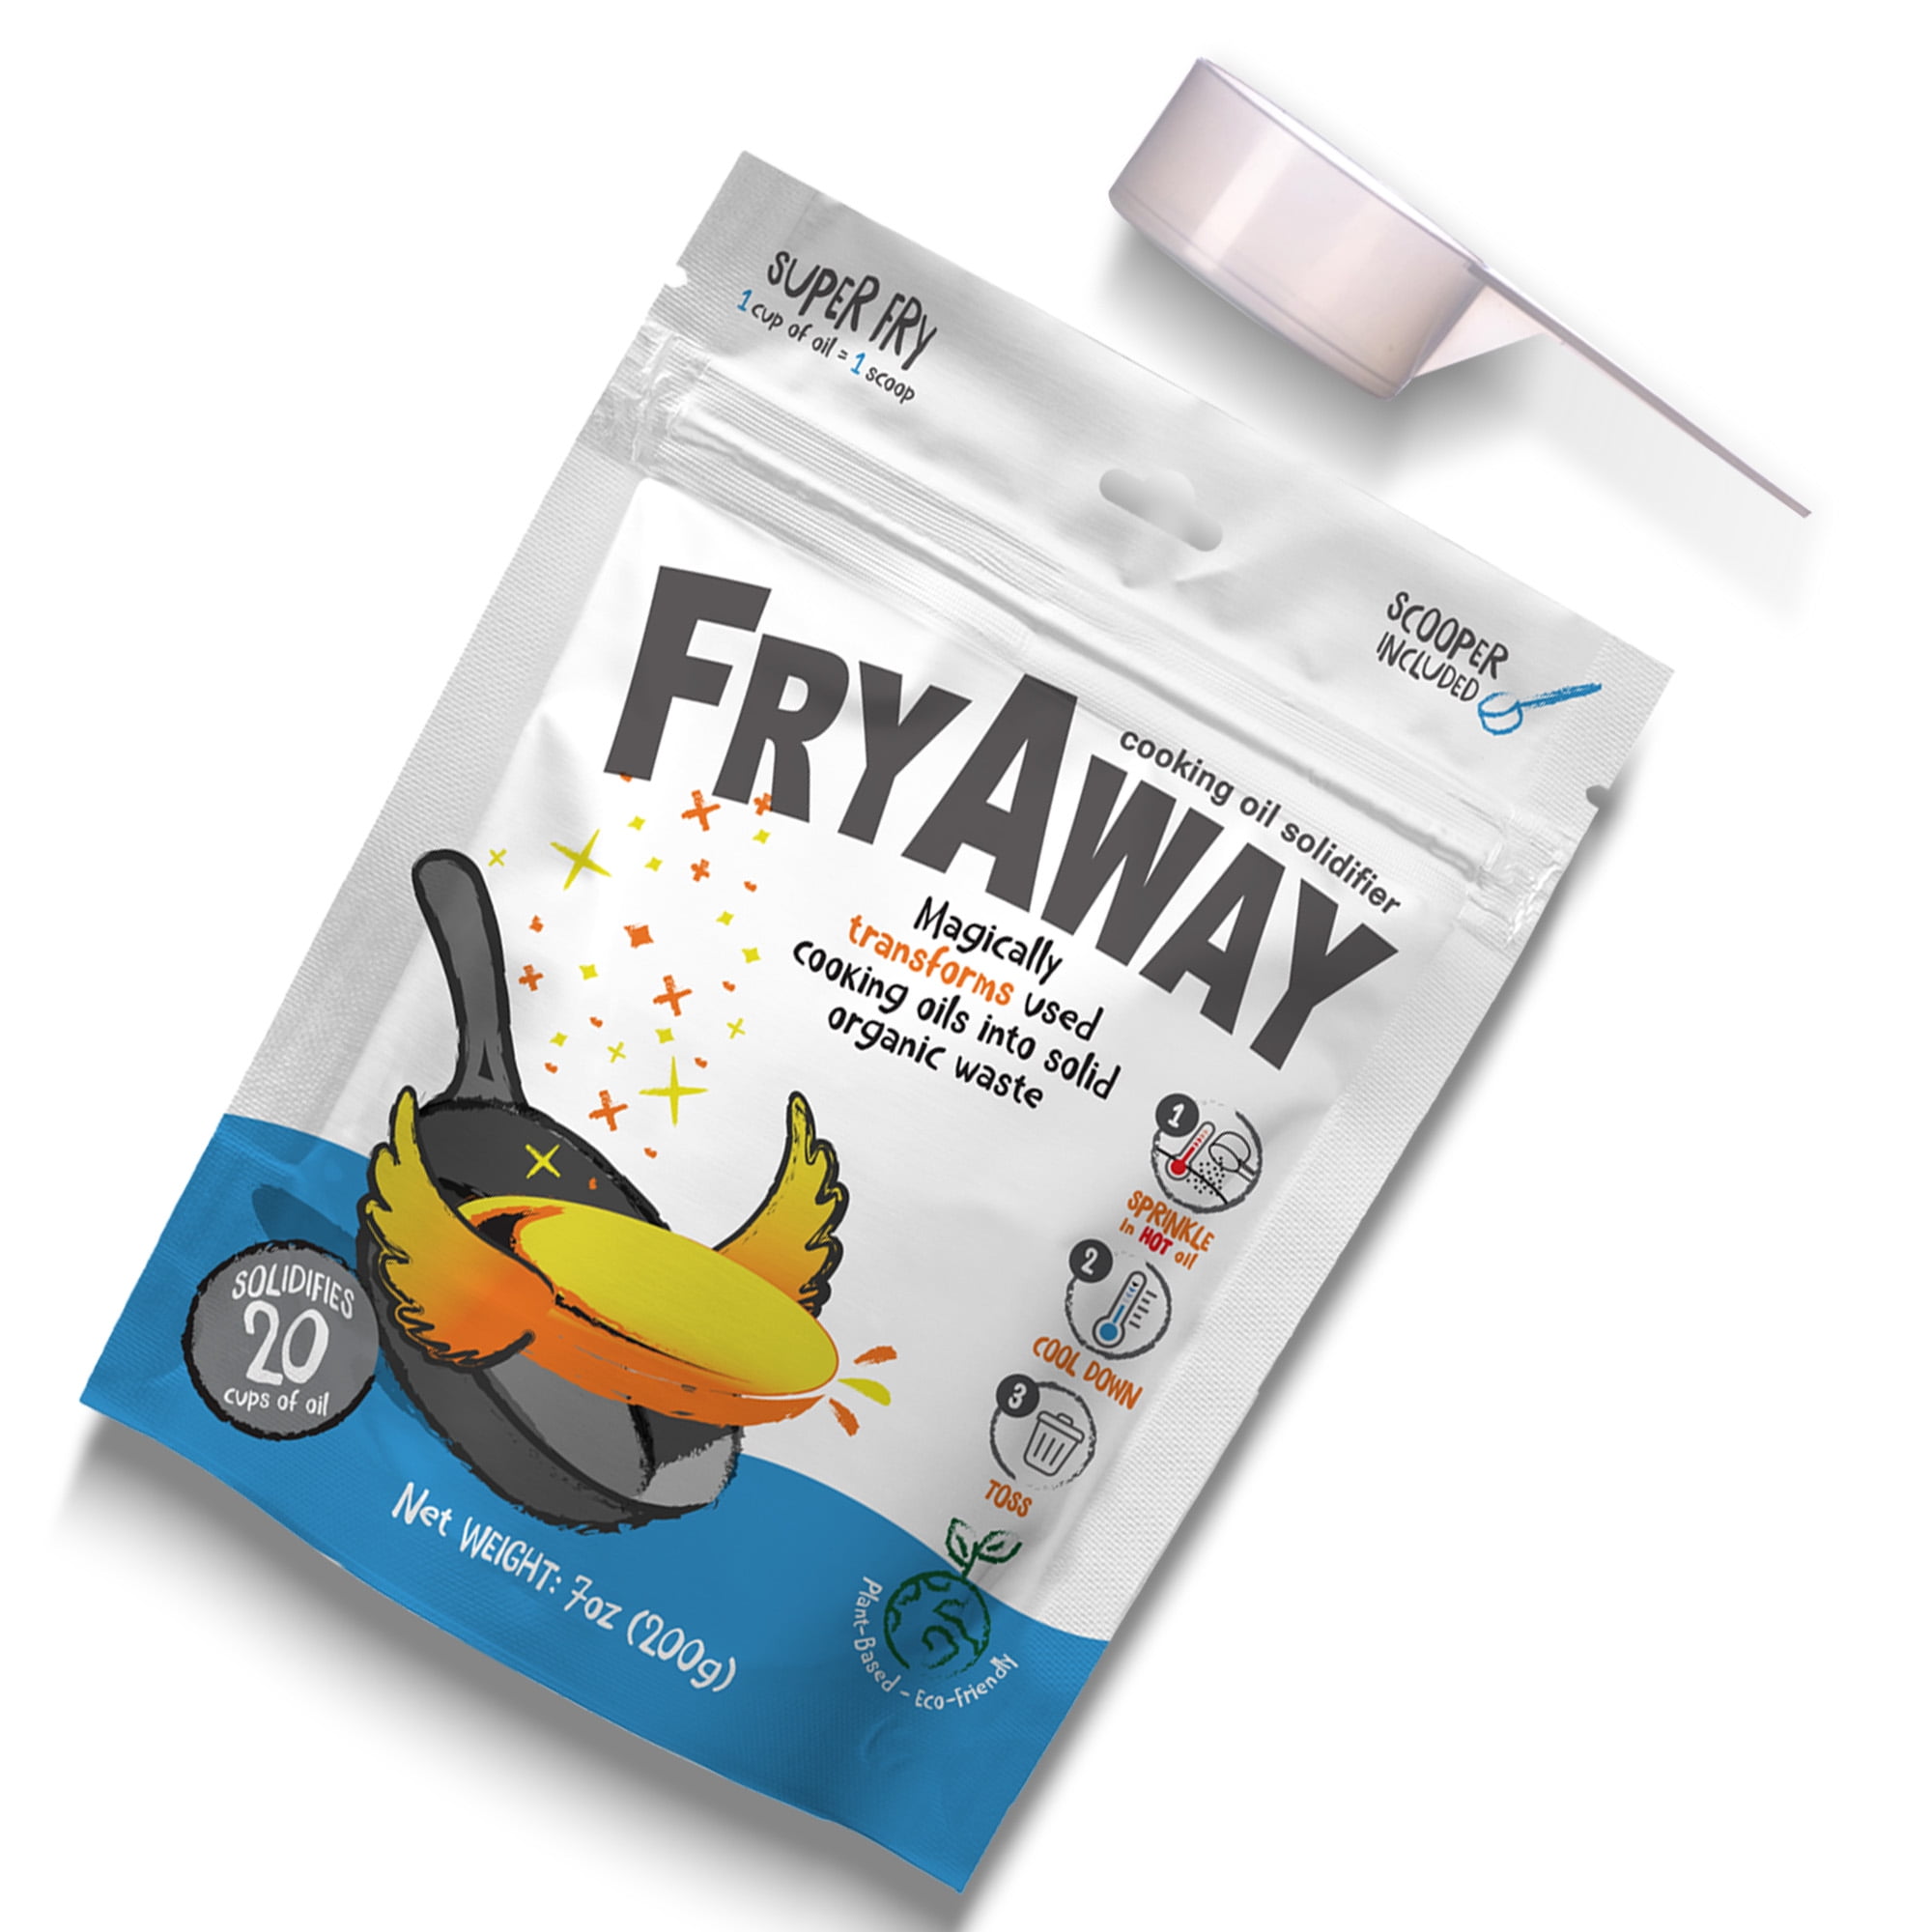 FryAway  Plant-Based Cooking Oil Solidifier (@fryawayco) • Instagram  photos and videos